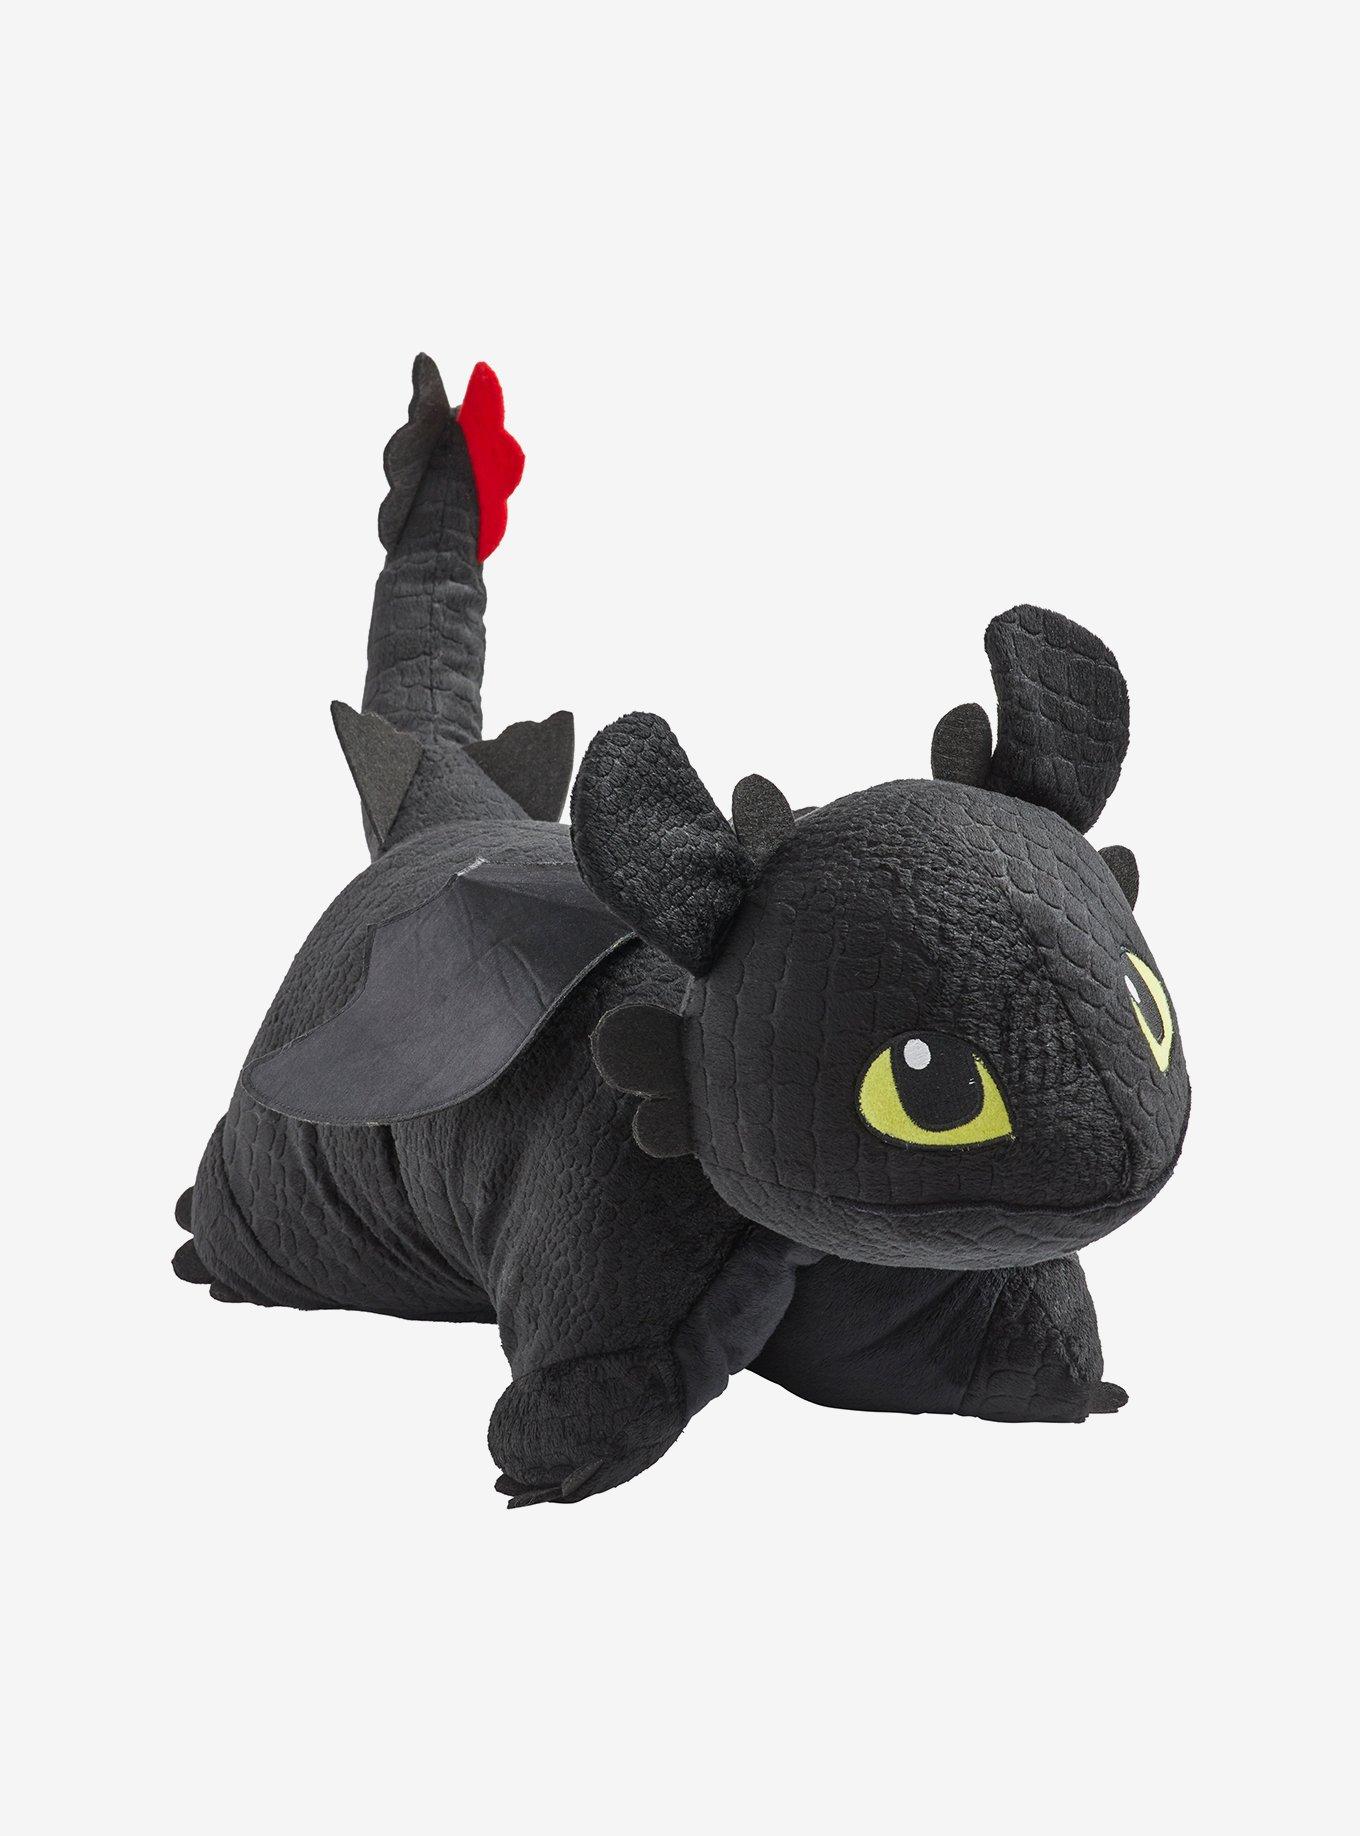 how to train your dragon 2 grump toy